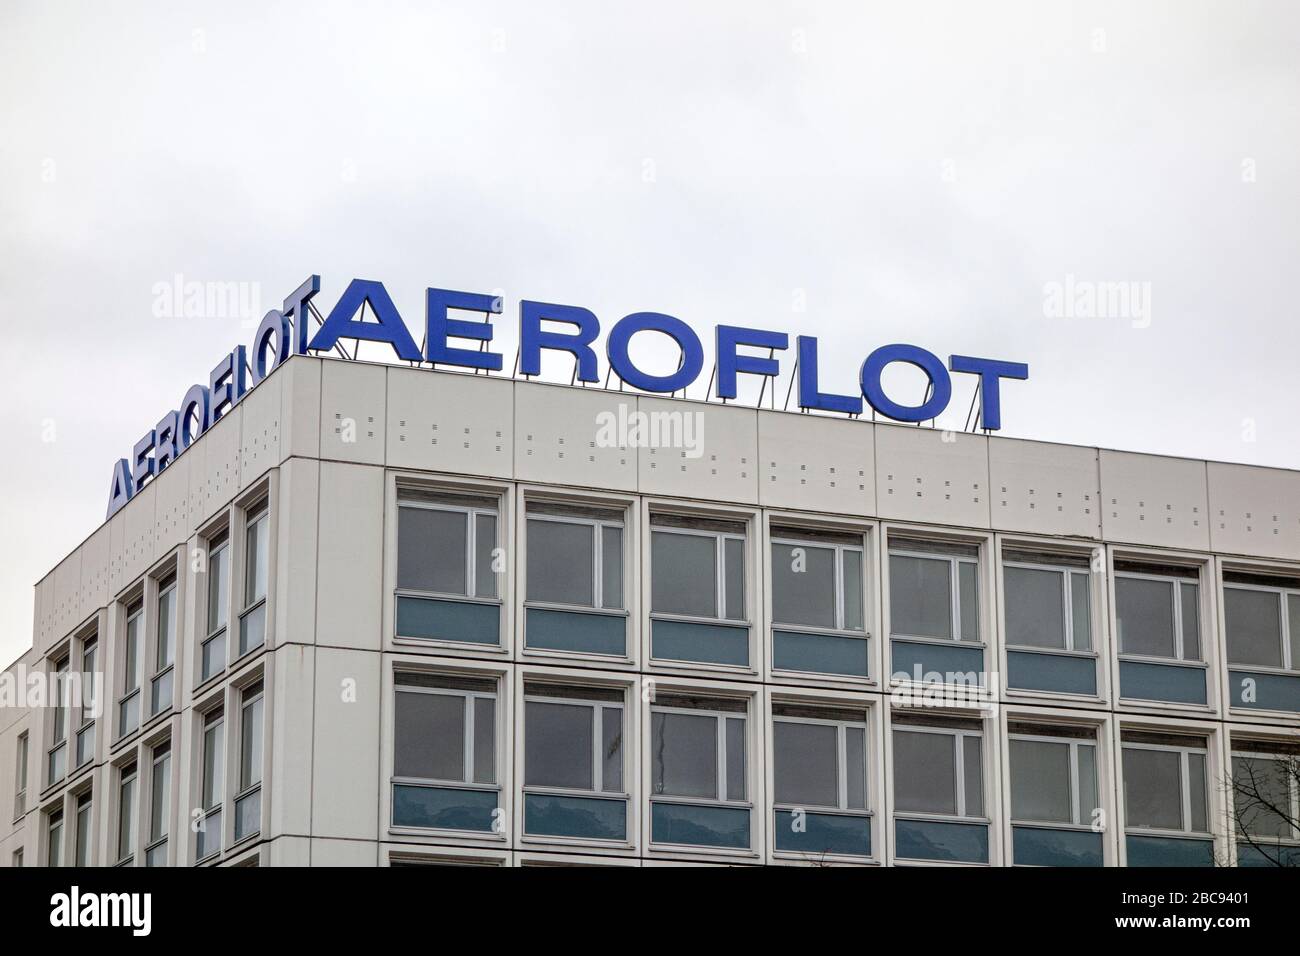 Berlin / Germany - Dec 25, 2017: Aeroflot sign in Berlin, Germany - Aeroflot is the flag carrier and largest airline of the Russian Federation Stock Photo